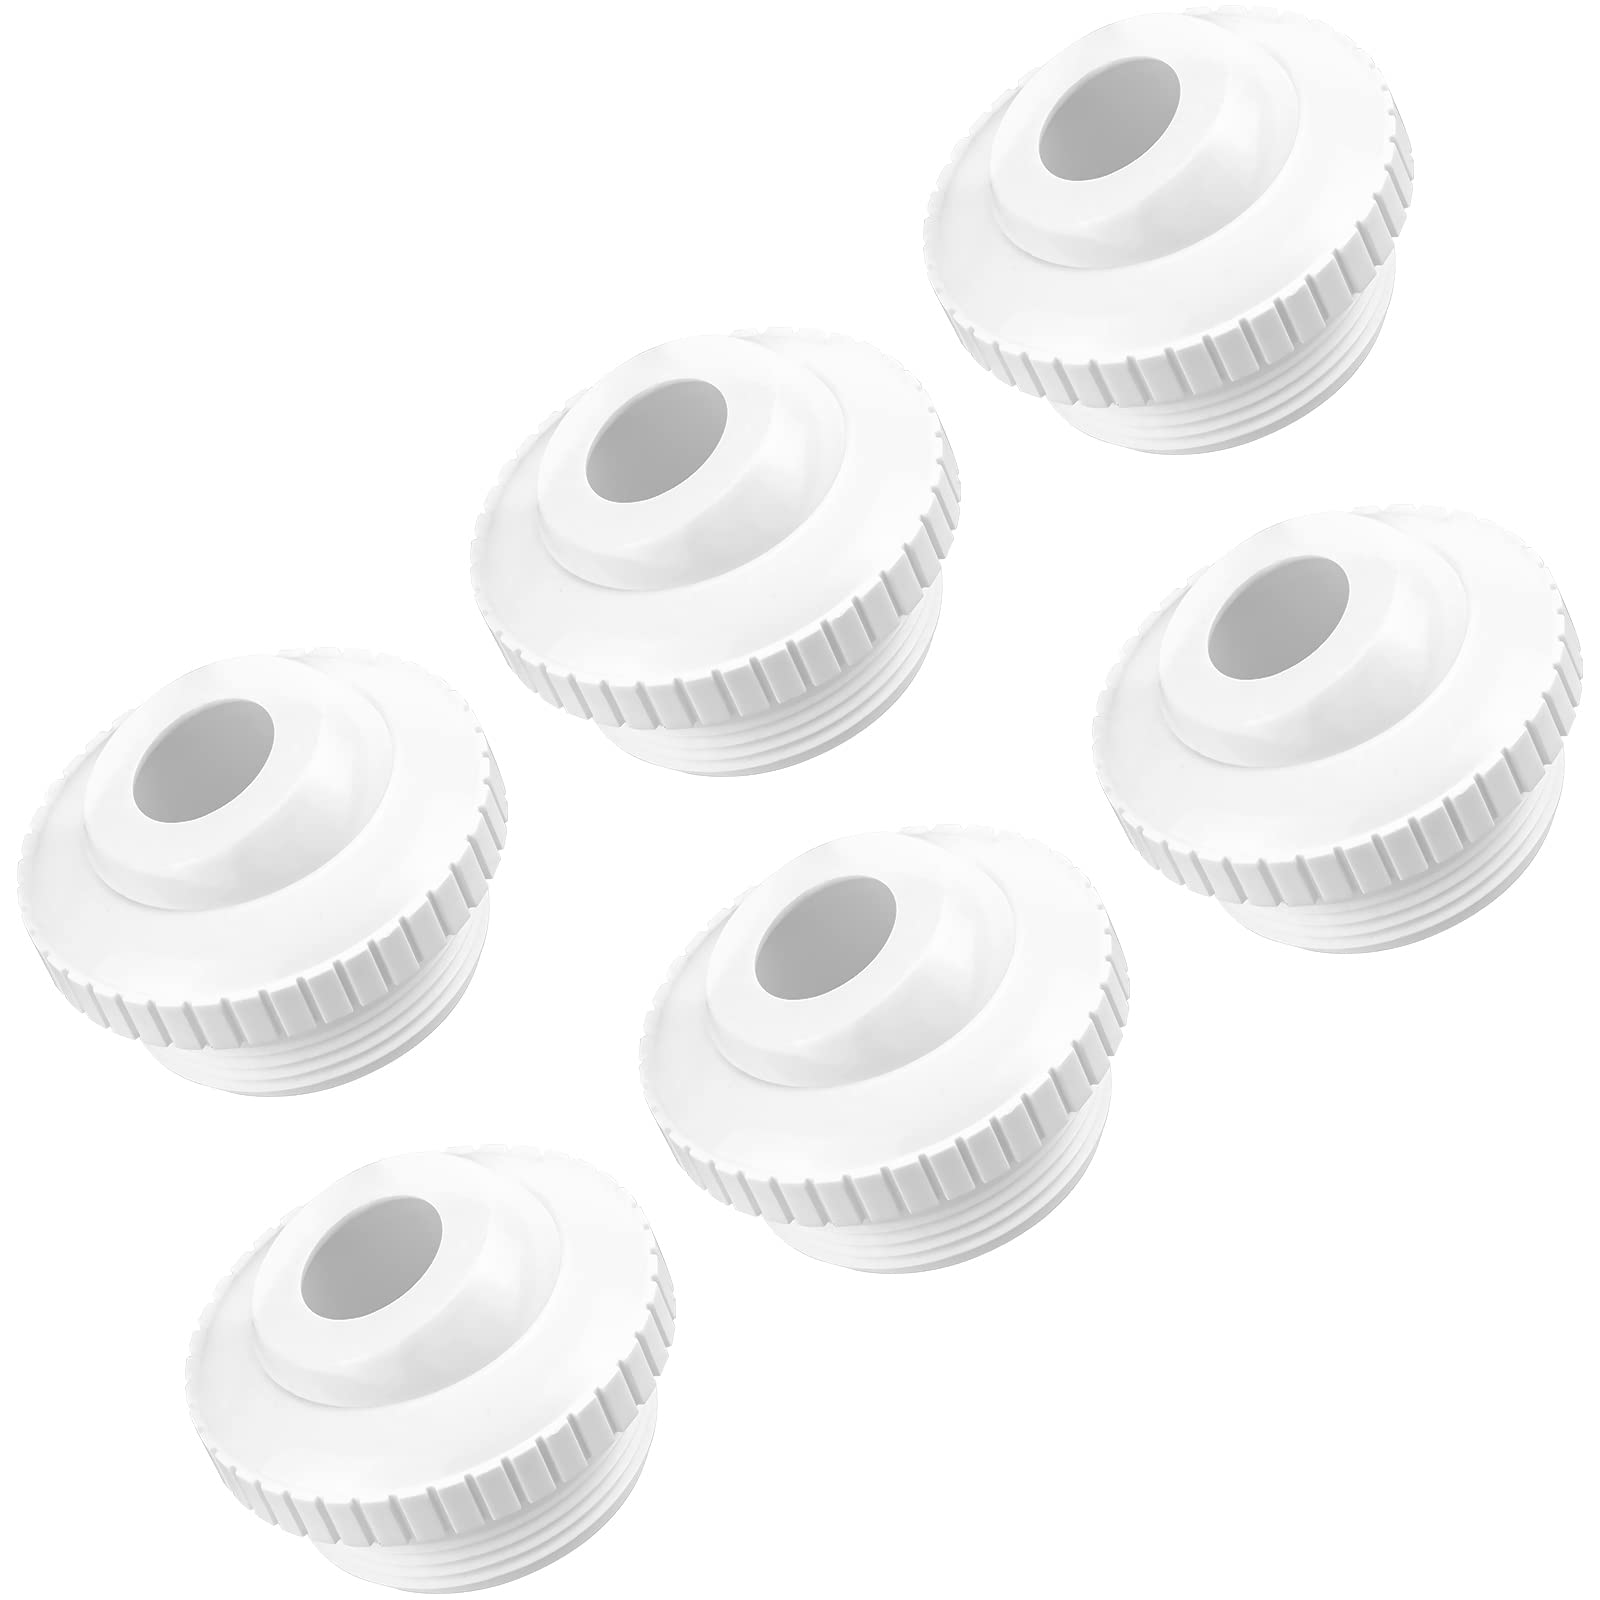 Funmit Pool Jet Nozzles 3/4" SP1419D Flow Inlet Fitting Opening Water Directional Pool Return Fittings, 6 Pack